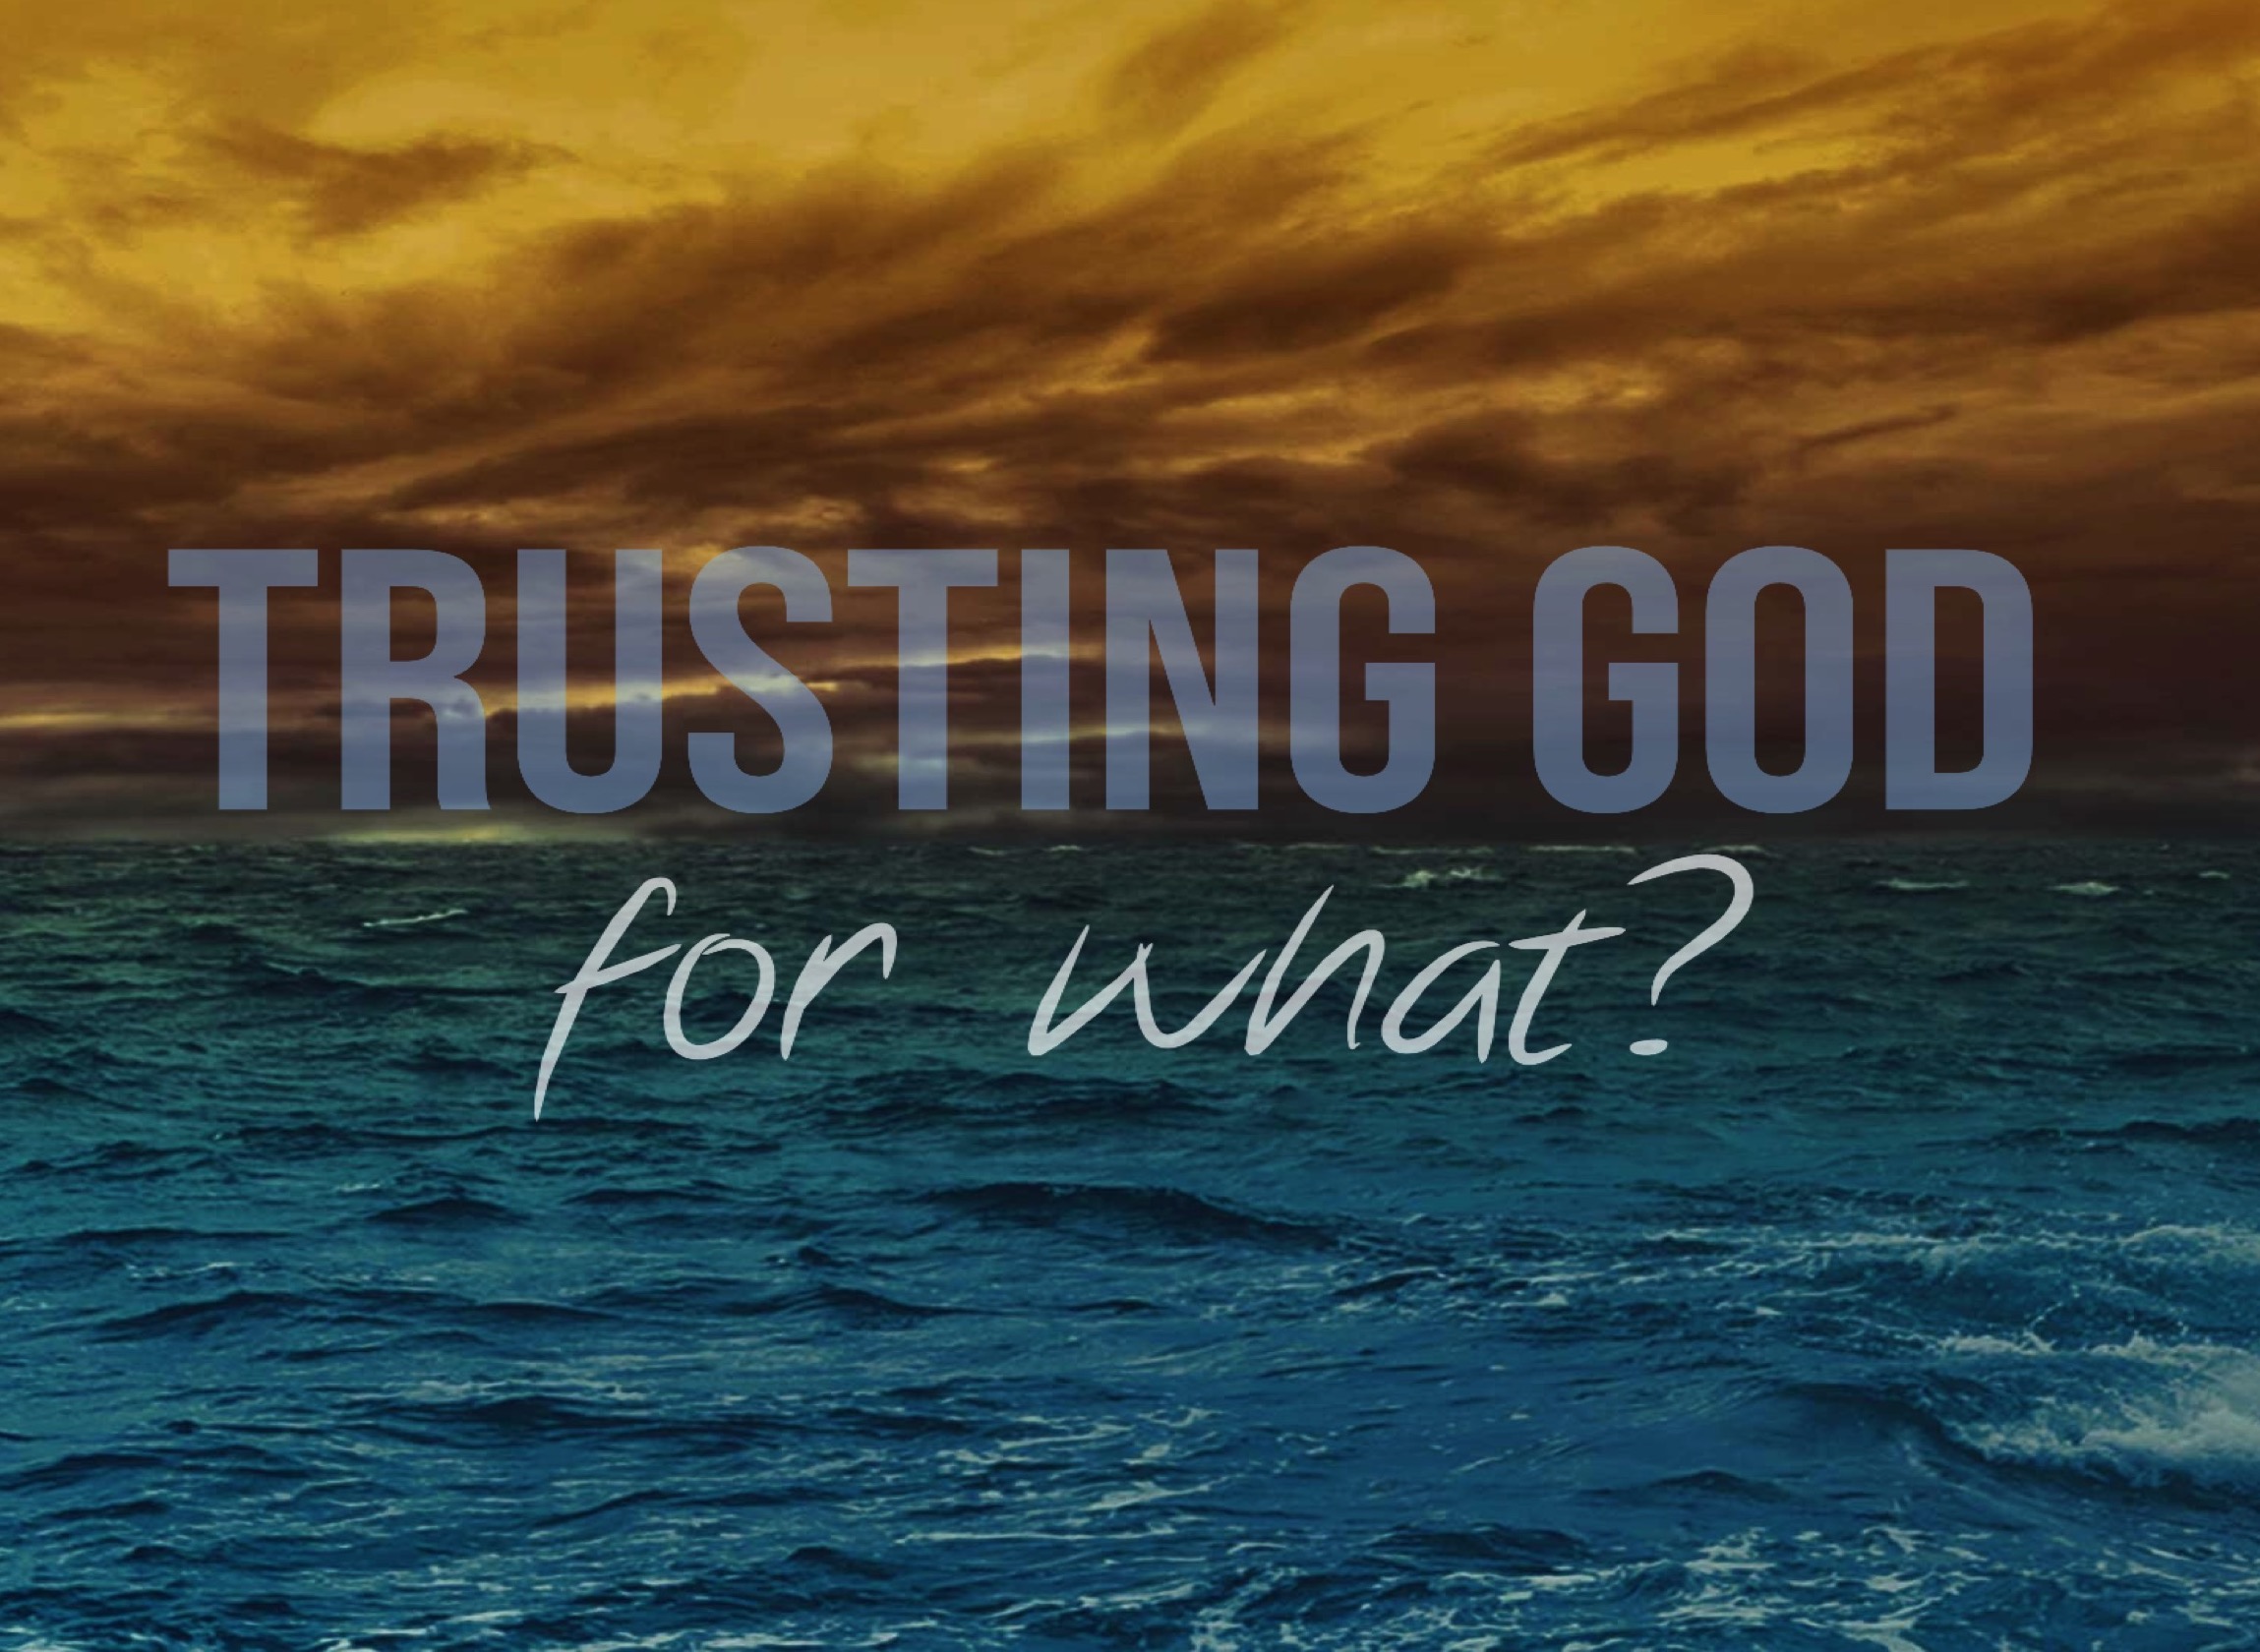 Ryan Post - &#34;Trusting God for What?&#34;